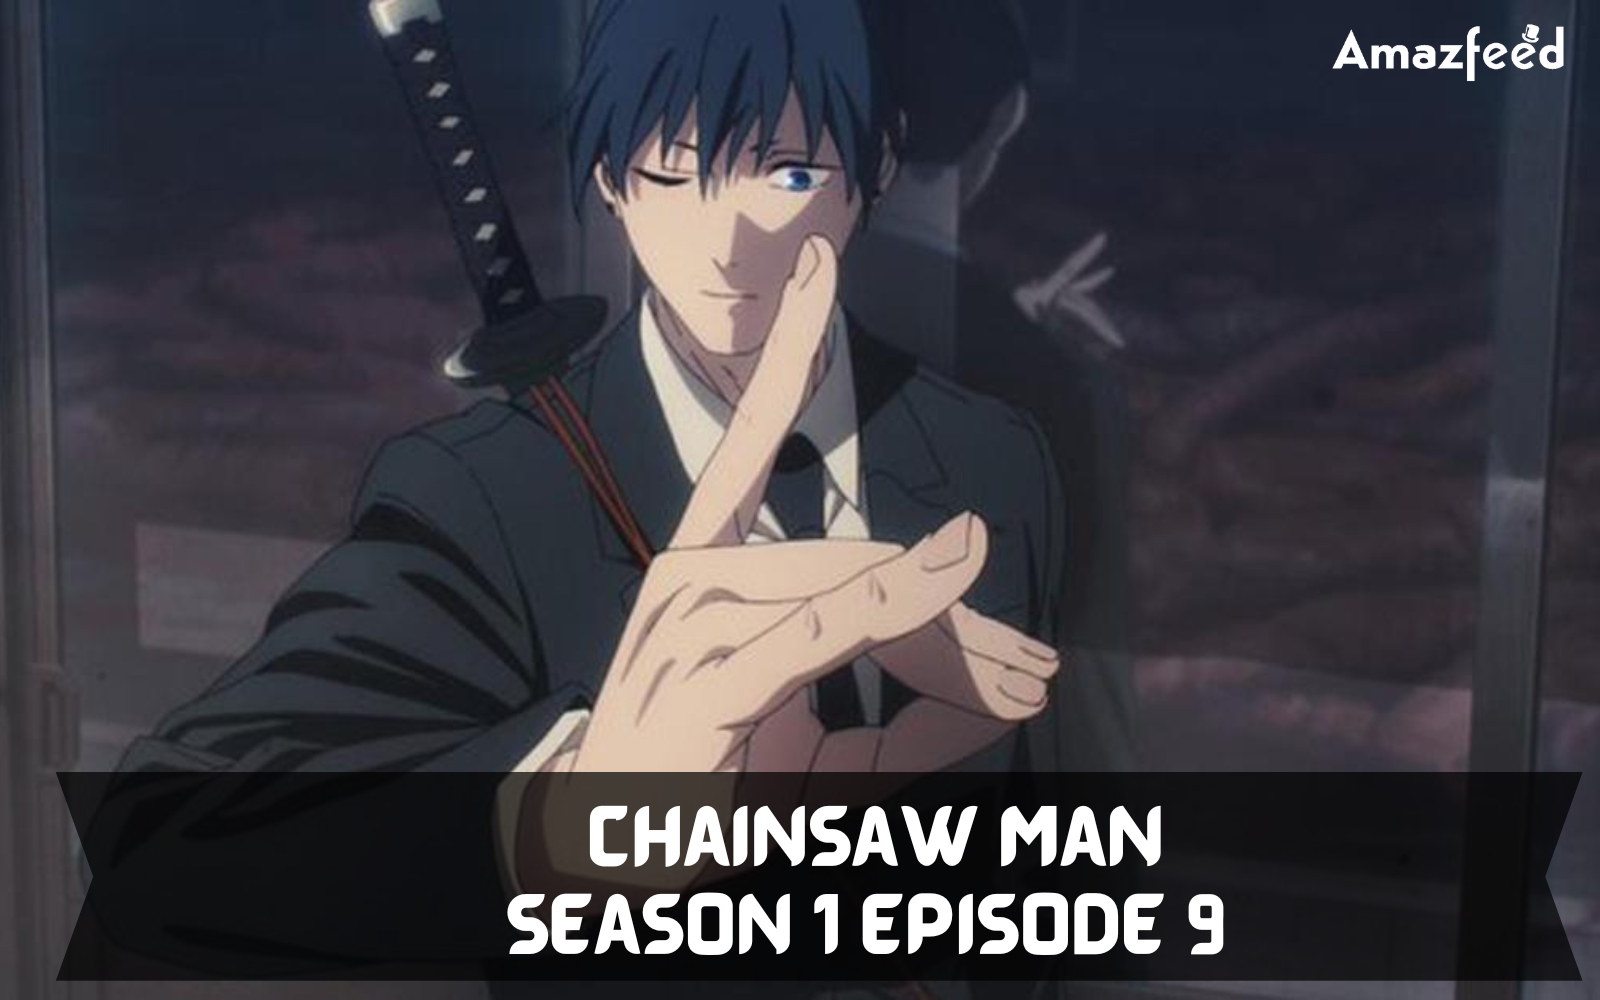 Anime Corner - JUST IN: Chainsaw Man - Episode 9 Preview! Watch:  acani.me/csm-preview-ep9